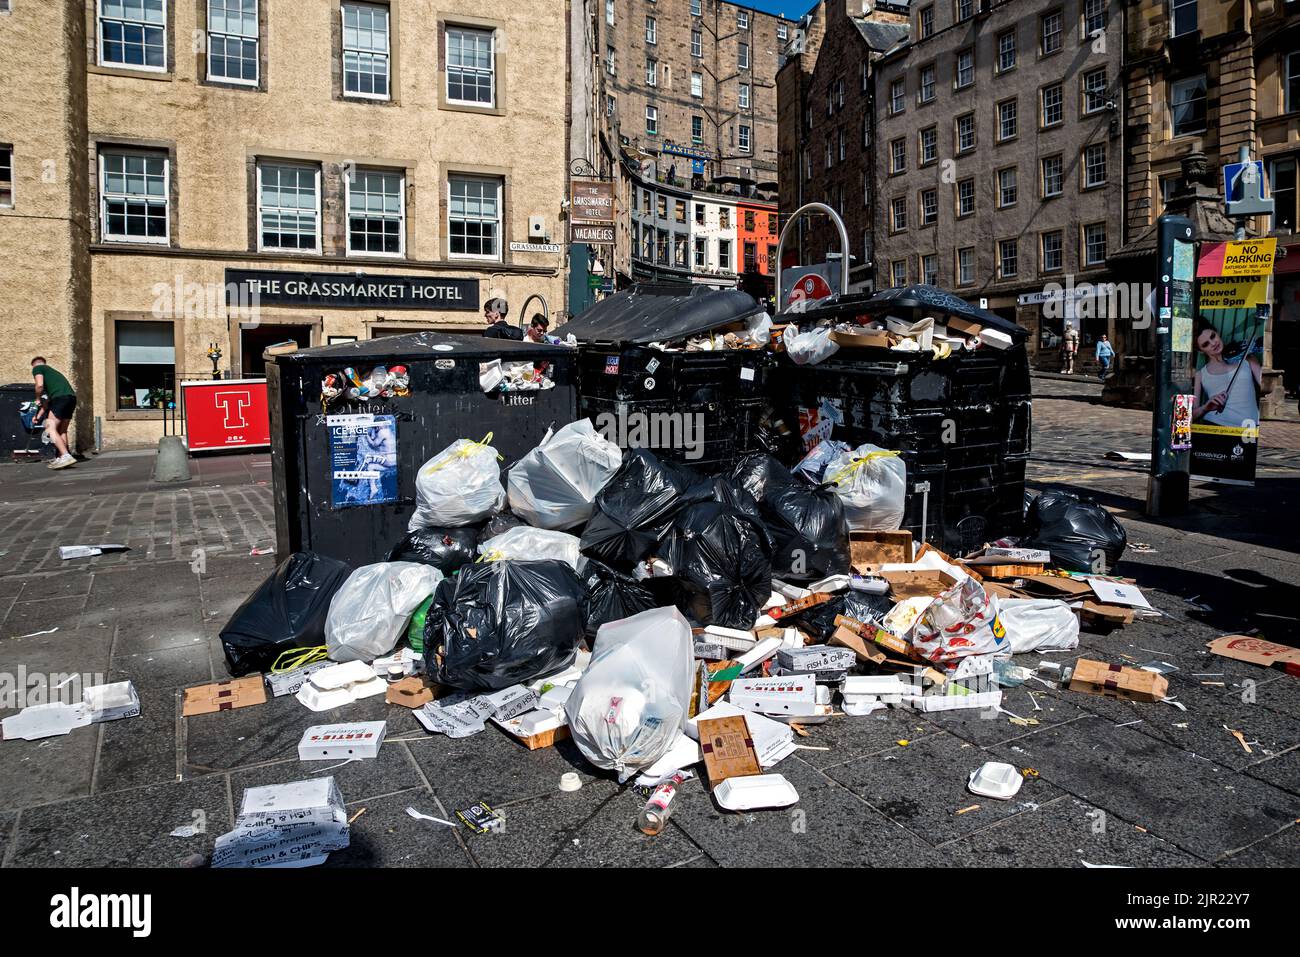 Rubbish bins overflowing in the Grassmarket due to industrial action by Edinburgh council workers. Edinburgh, Scotland, UK. Stock Photo